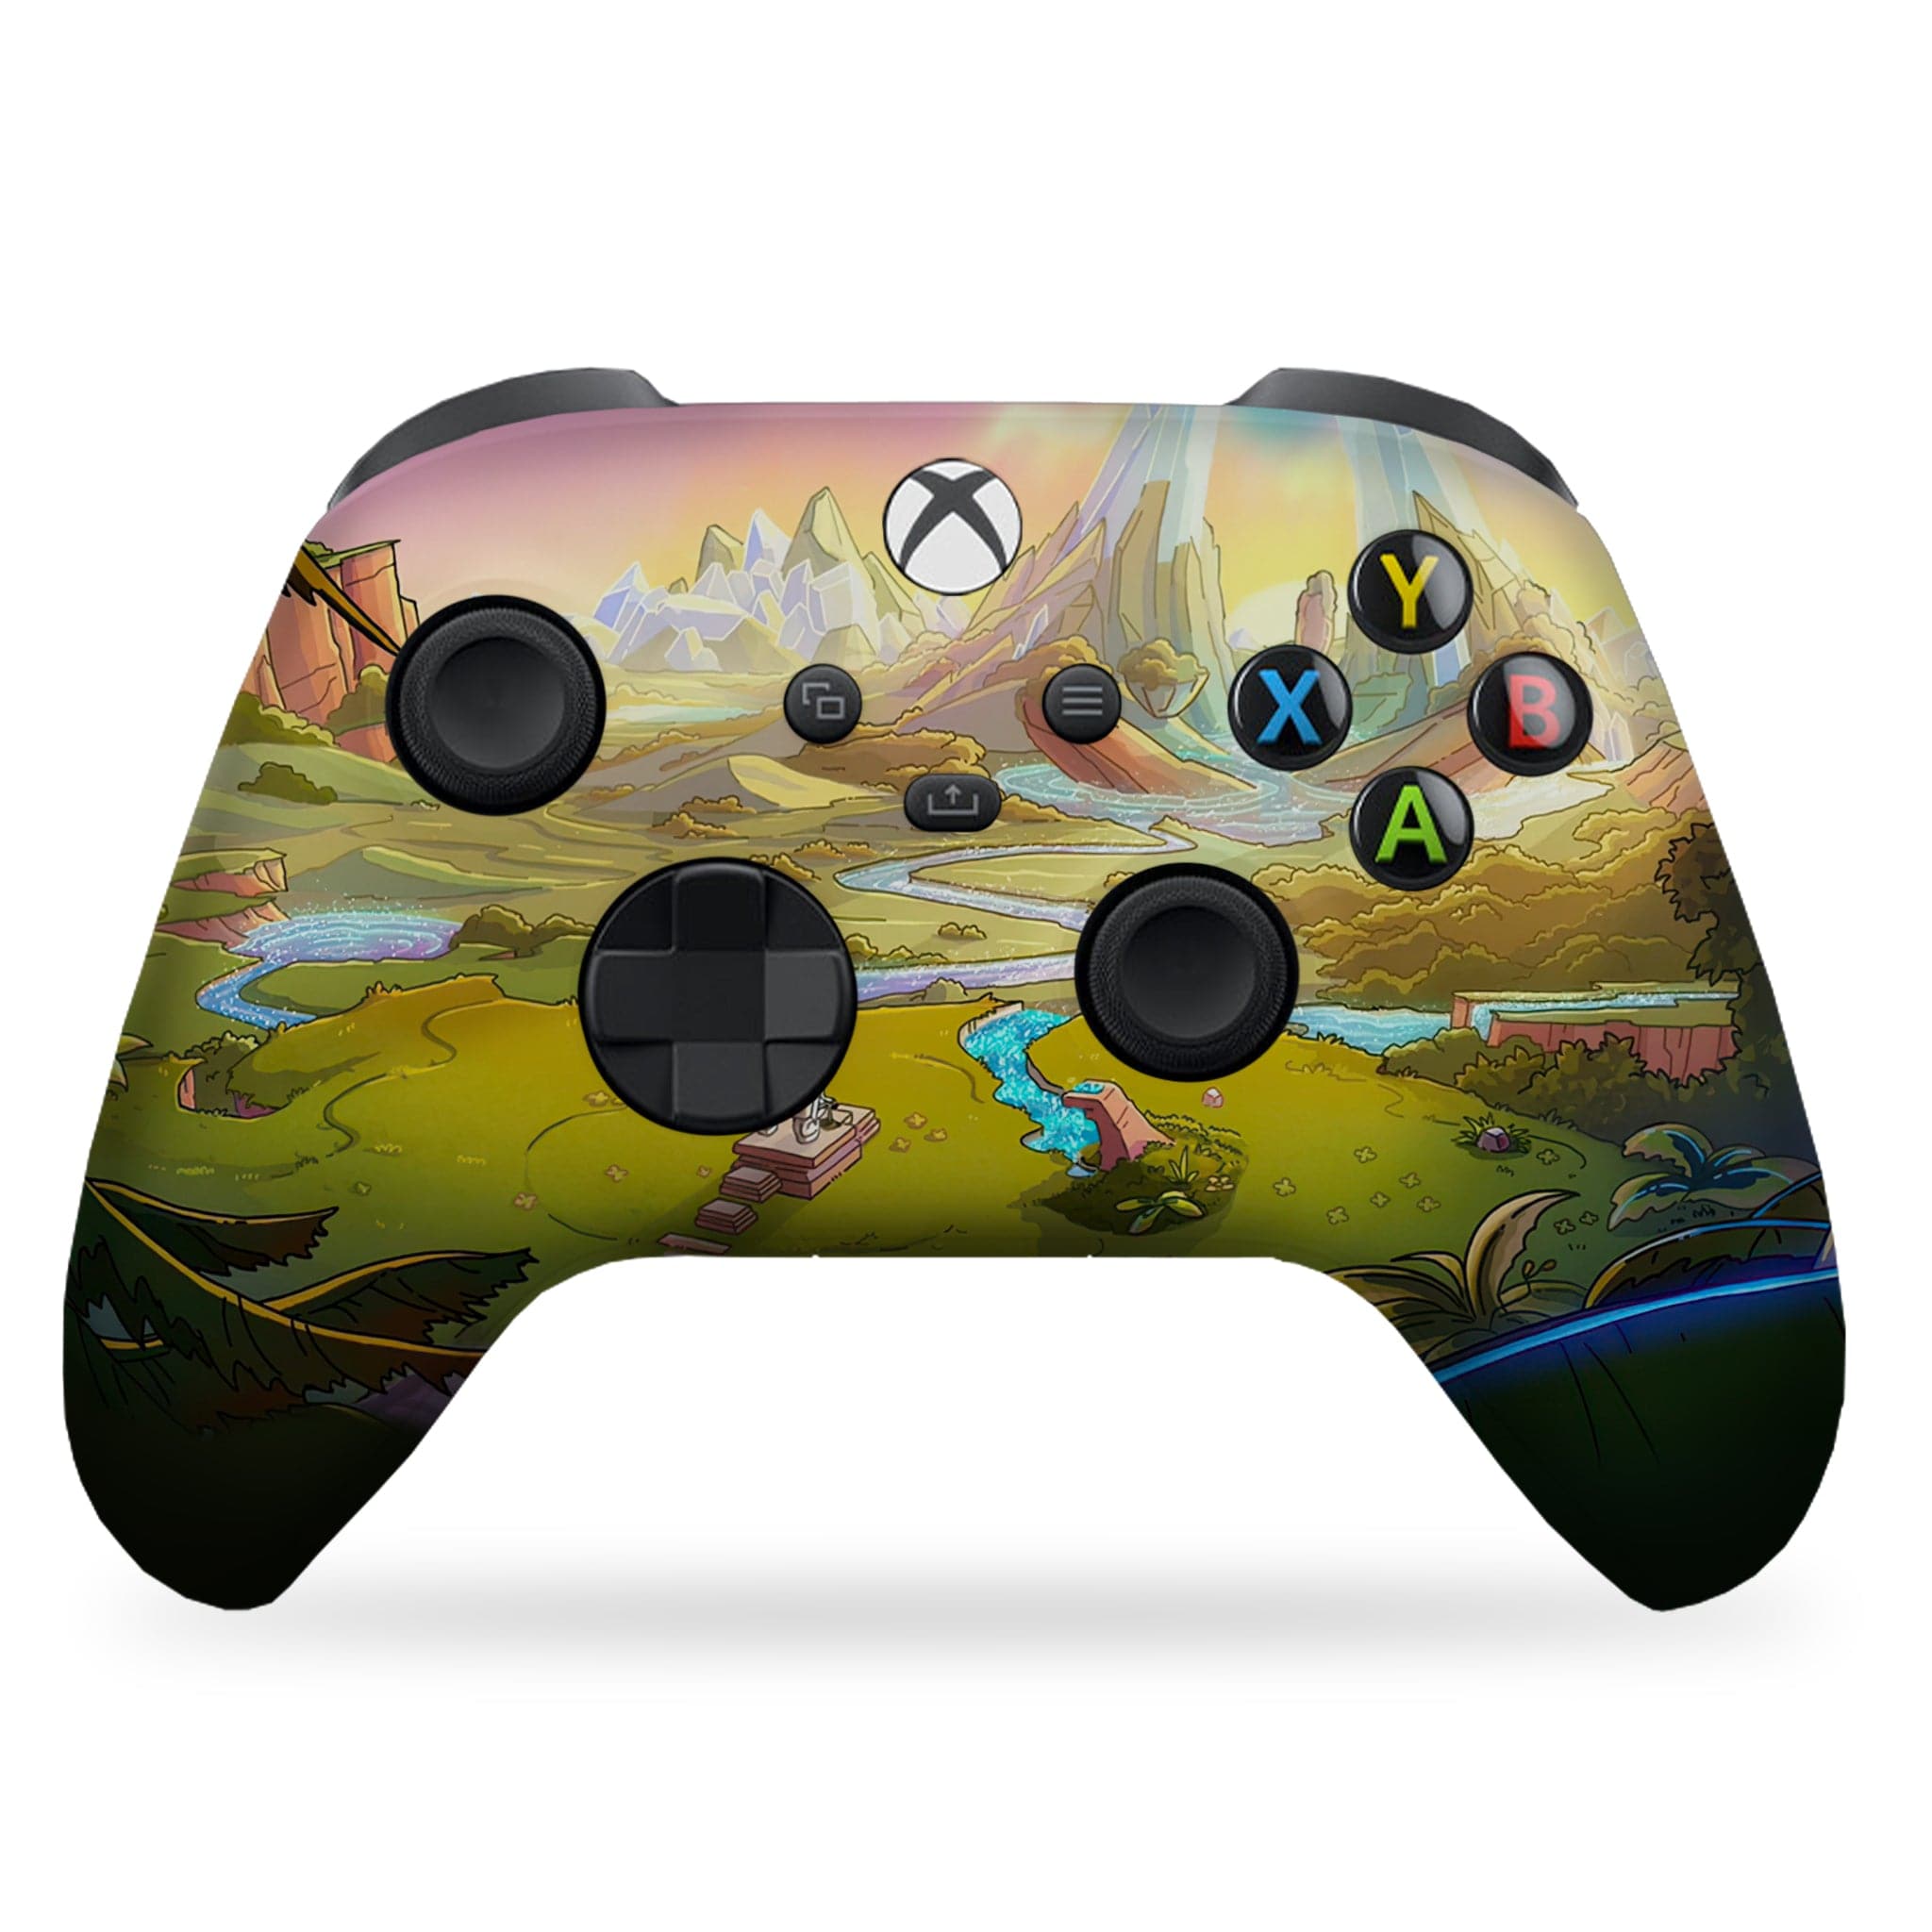 Loo Heaven Rick & Morty inspired Xbox Series X Controller